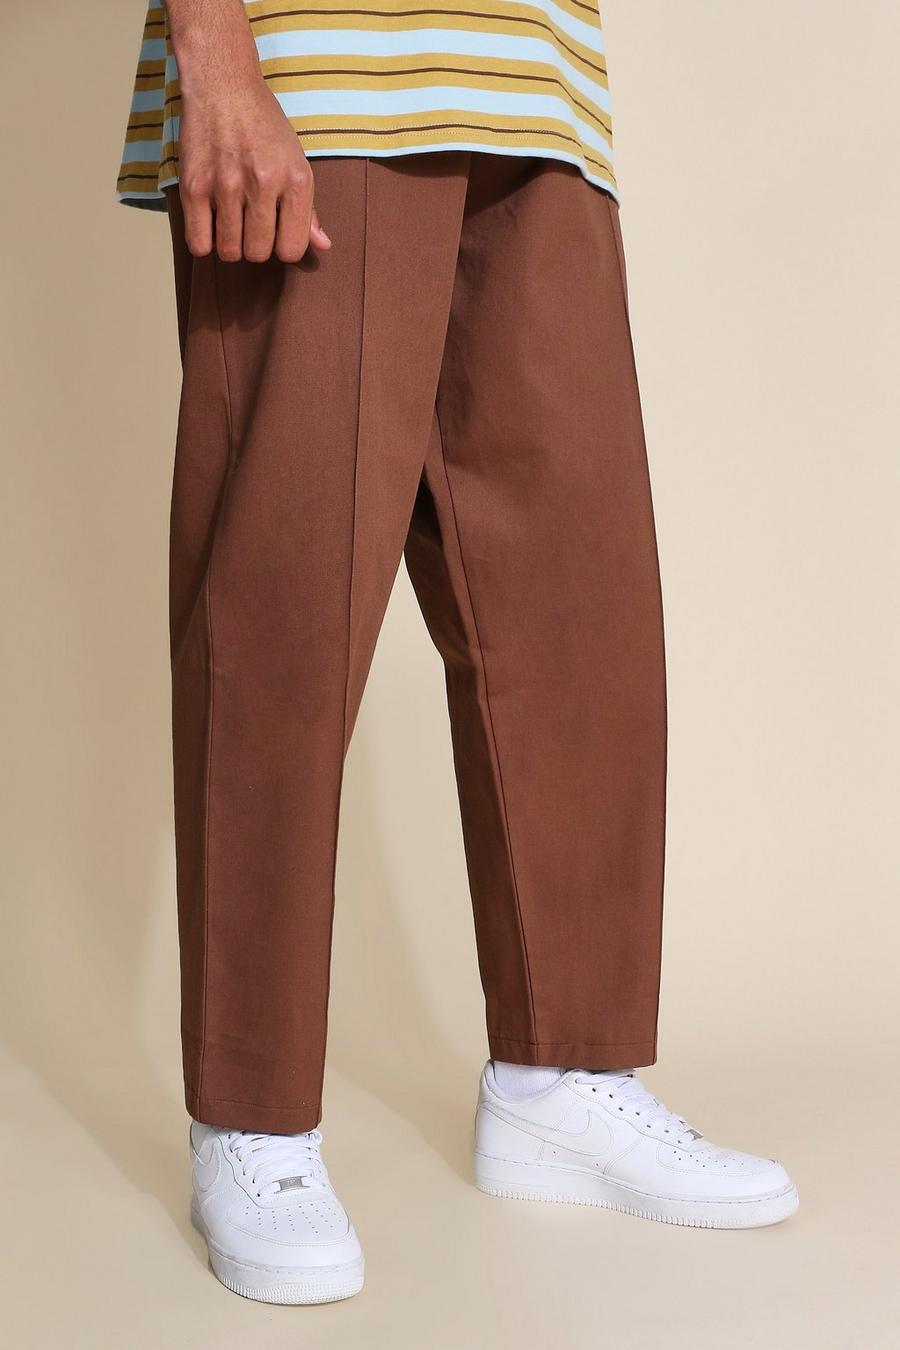 Rust Tall Keperstof Skater Chinos image number 1